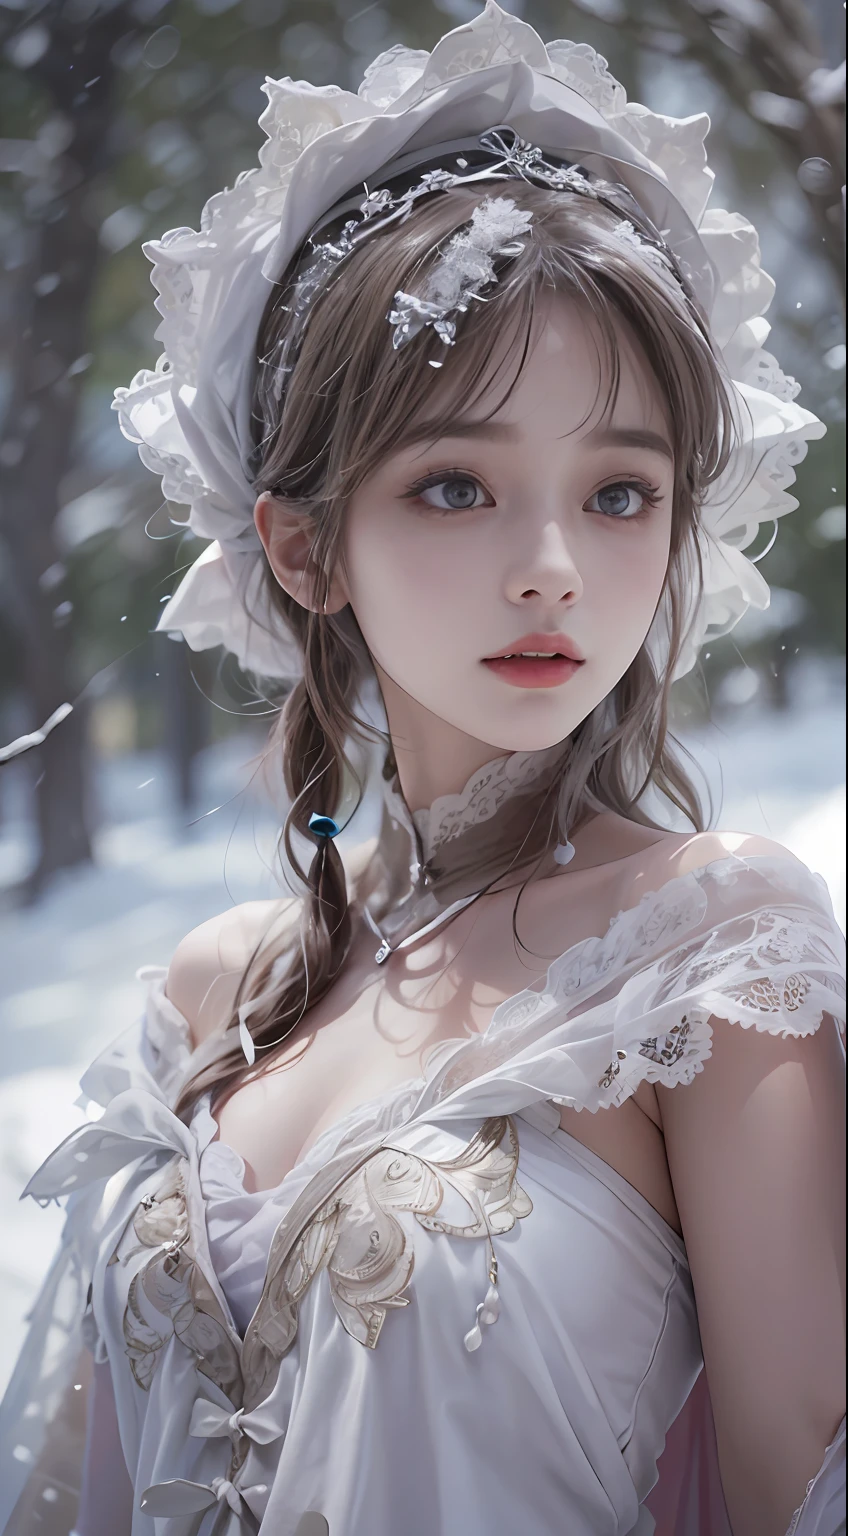 （8K，RAW photos， best qualtiy， tmasterpiece：1.2），（realisticlying， photograph realistic：1.4)，Hide your face with sadness，
Lolita costume，Lace， Aerith Gainsborough， The upper part of the body，upper legs，Lace， undergarments，exposed bare shoulders， do lado de fora， (outside，Covered with snow，cloaks，) high high quality， Adobe Lightroom， highdetailskin， looking at viewert，